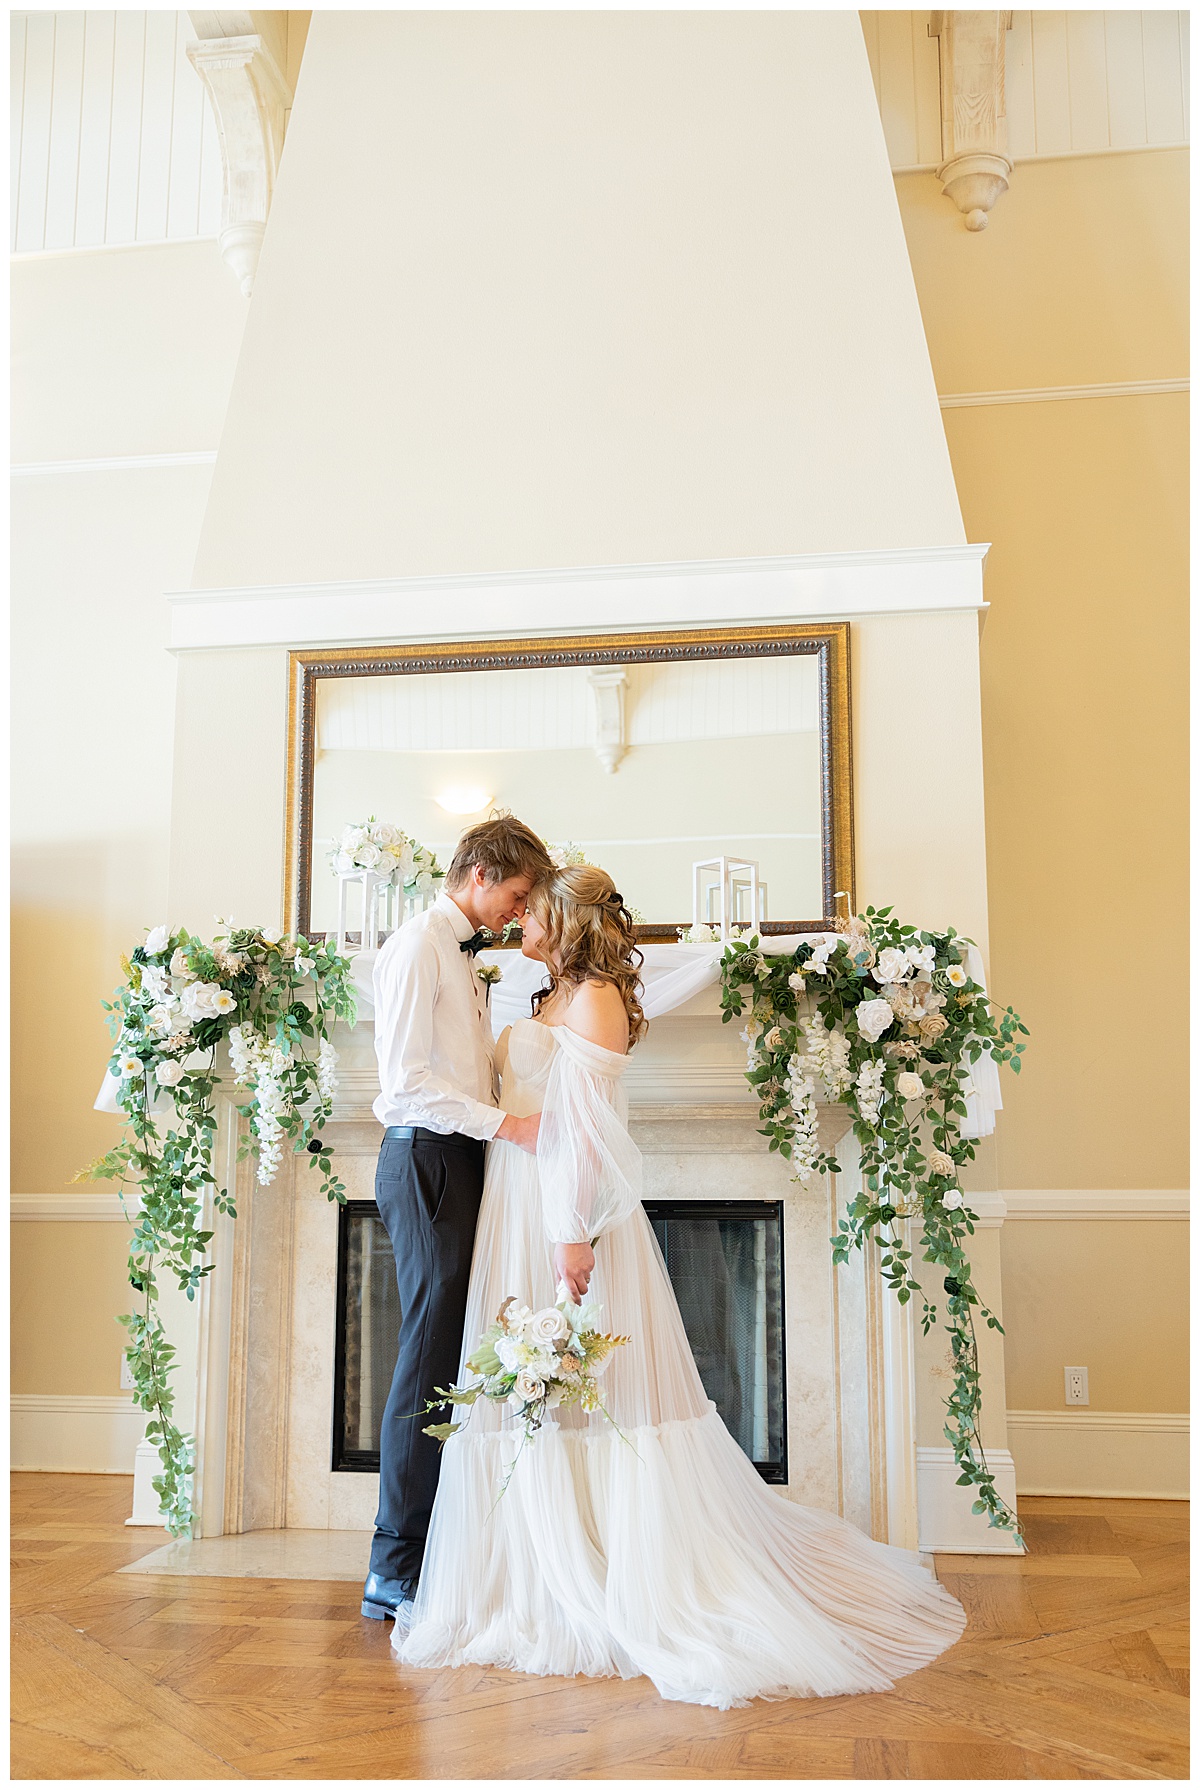 A bride and groom pose in front of a white fireplace with greenery and white flowers all over it for a winter wedding inspiration shoot.